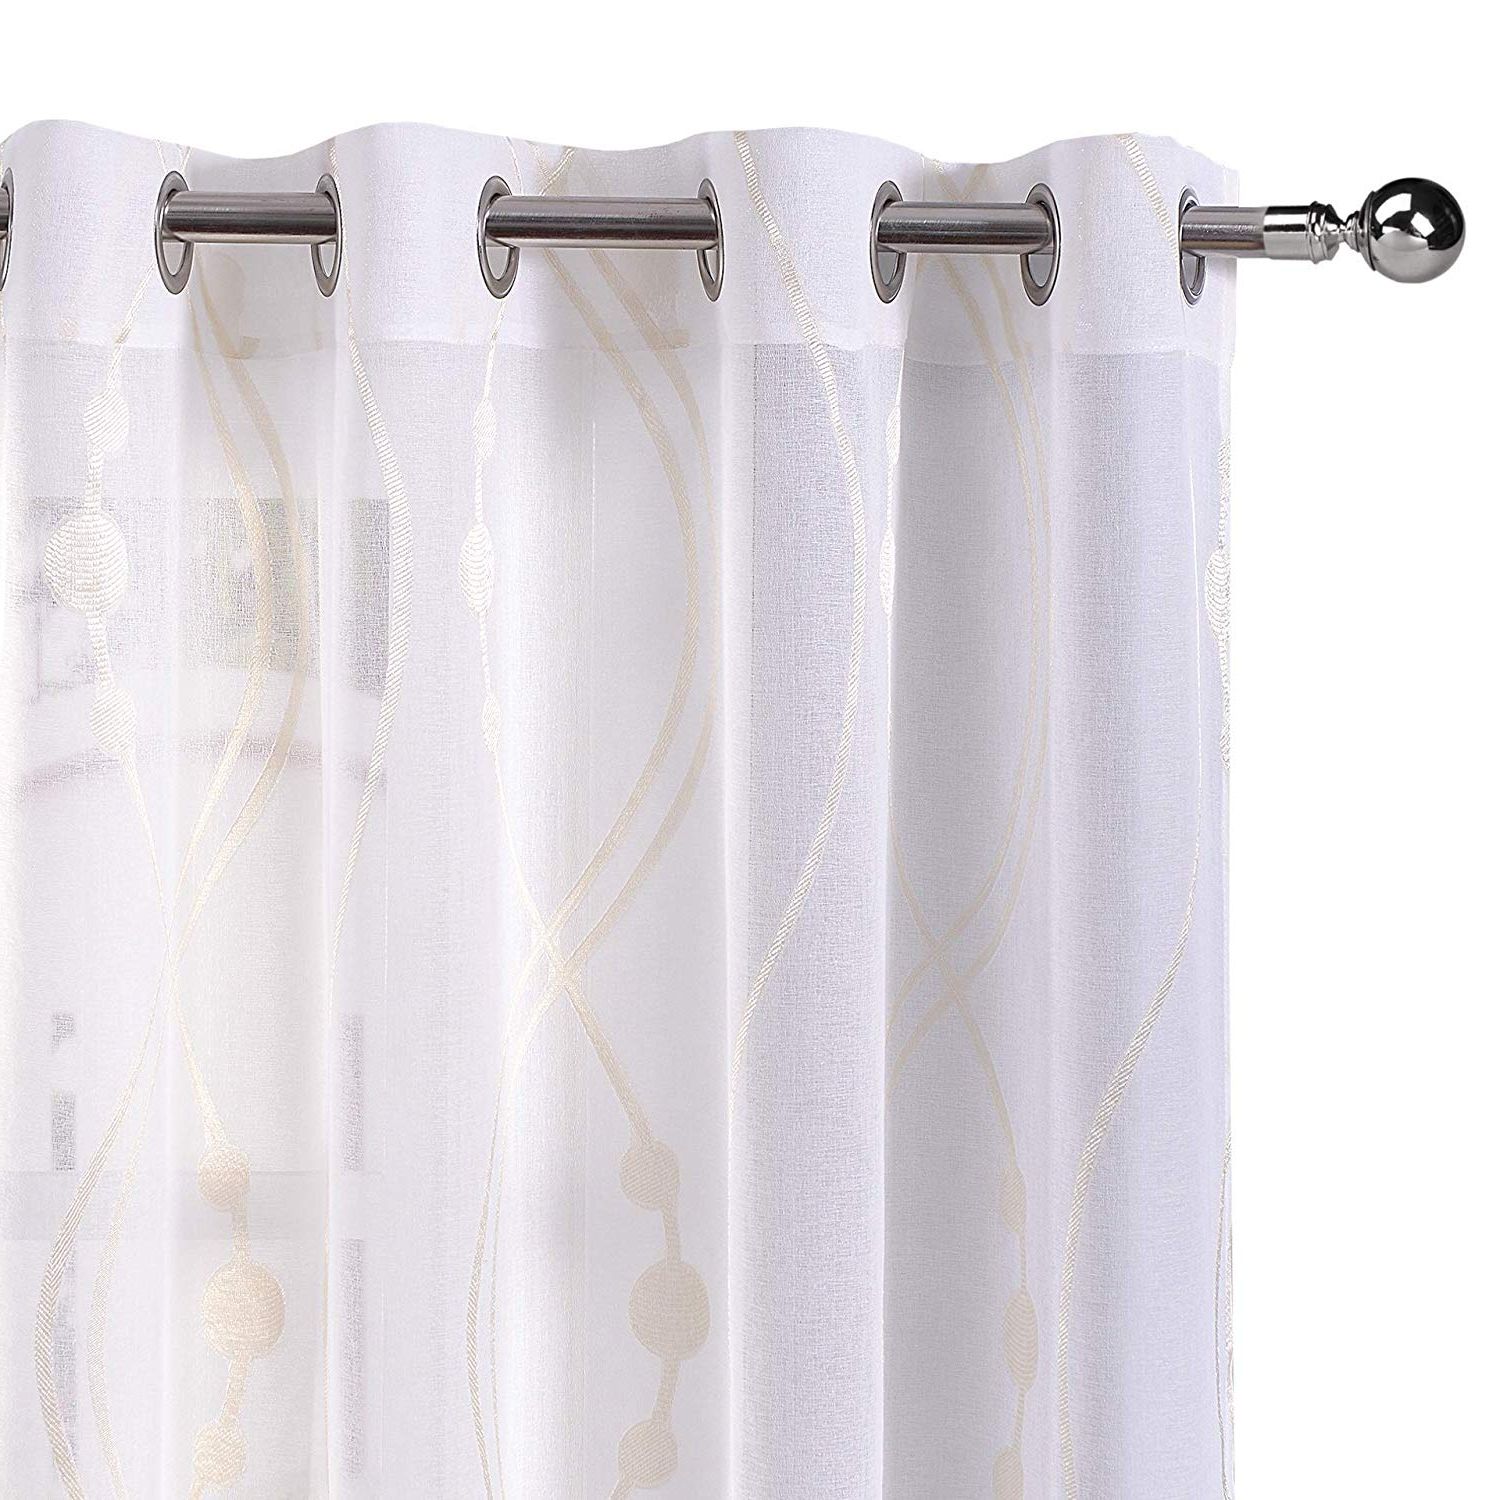 Micro Striped Semi Sheer Window Curtain Pieces With Regard To Well Liked Dwcn Semi Sheer Curtains Grommet Window Striped Jacquard Pattern Faux Linen  Voile Drapes For Bedroom Living Room 52 X 84 Inch Long, 2 Panels White And (View 18 of 20)